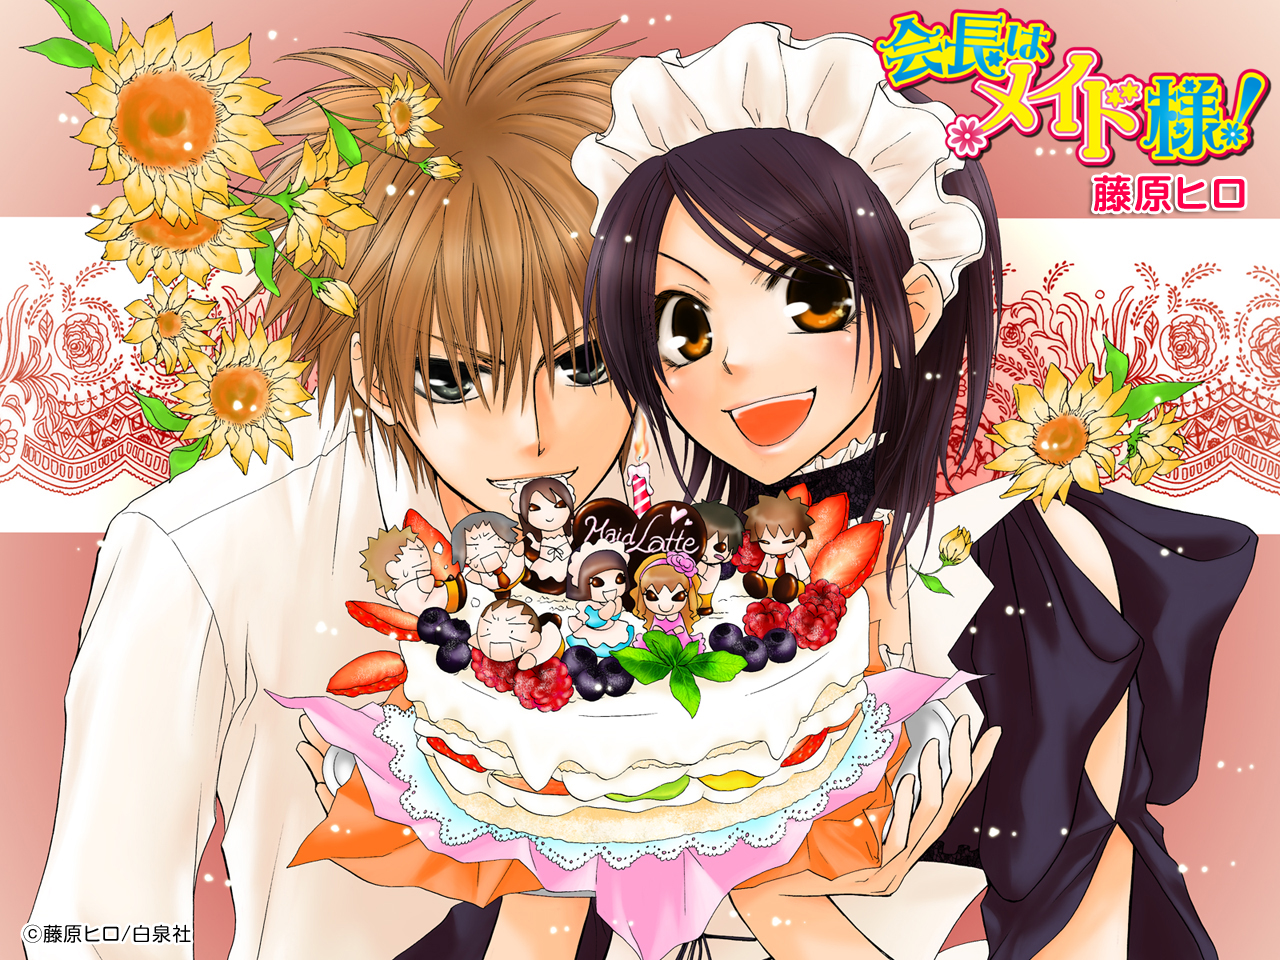 Amazing Maid Sama! Pictures & Backgrounds